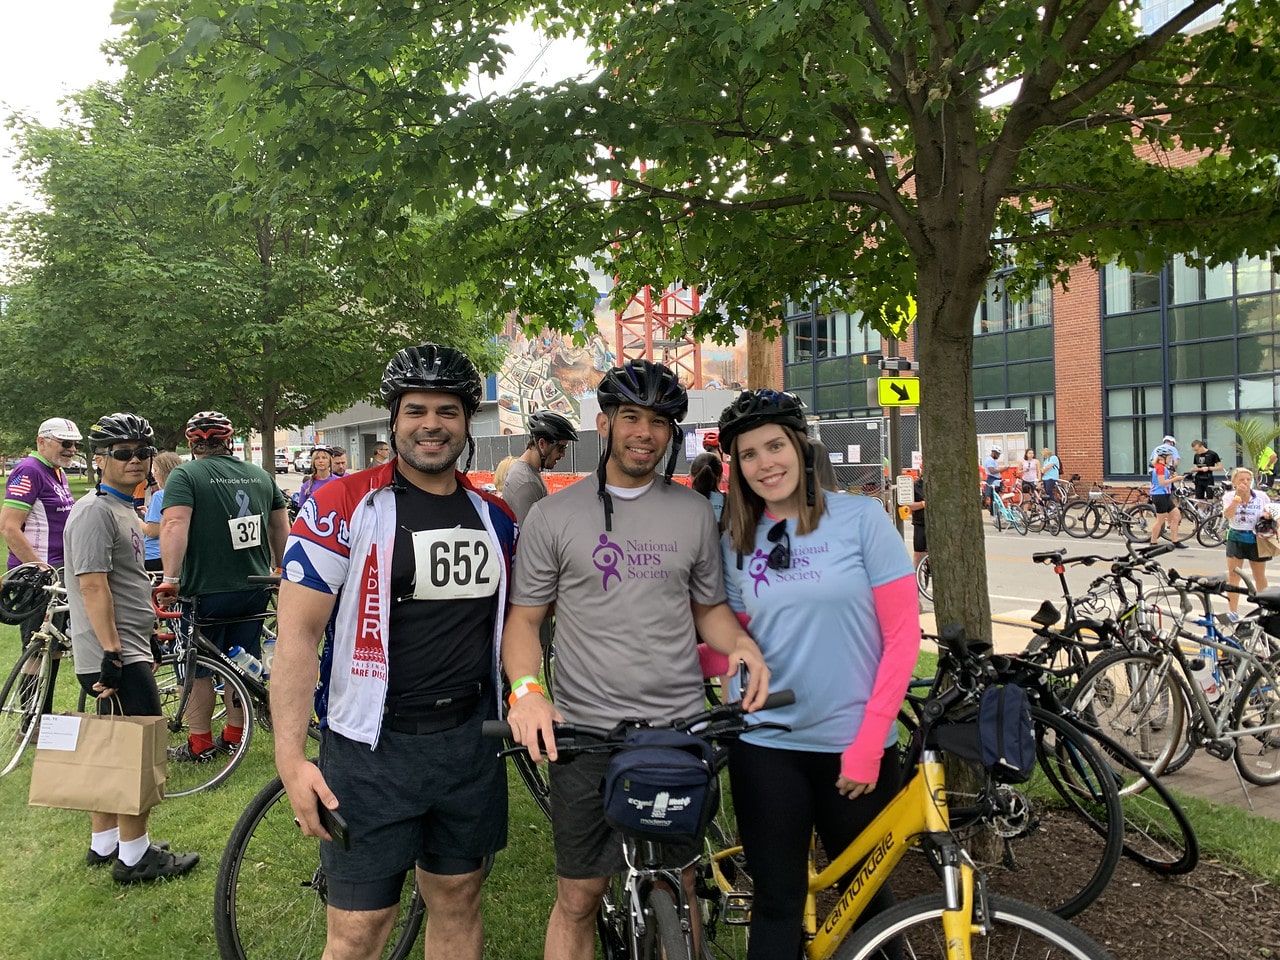 Three friends at a cycling race to raise funds for MPS